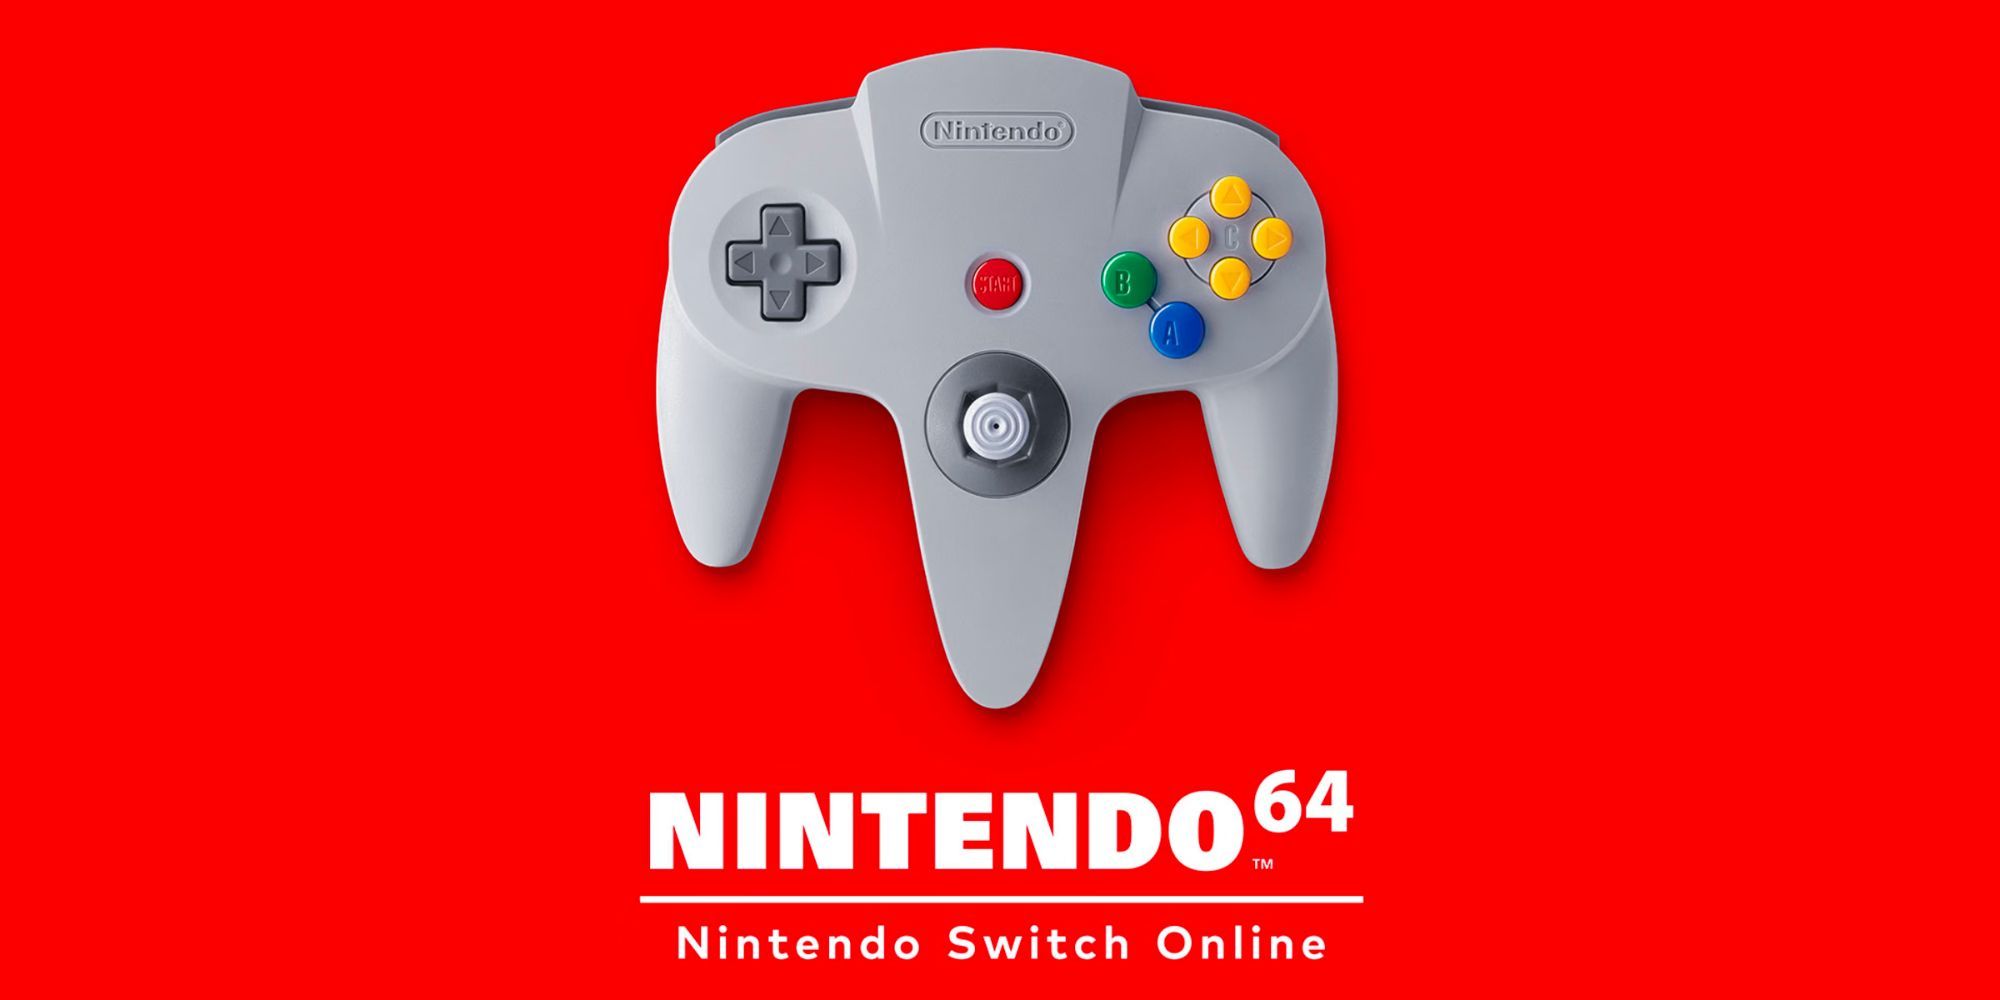 Is Super Smash Bros. 64 coming to Nintendo Switch? - Inven Global